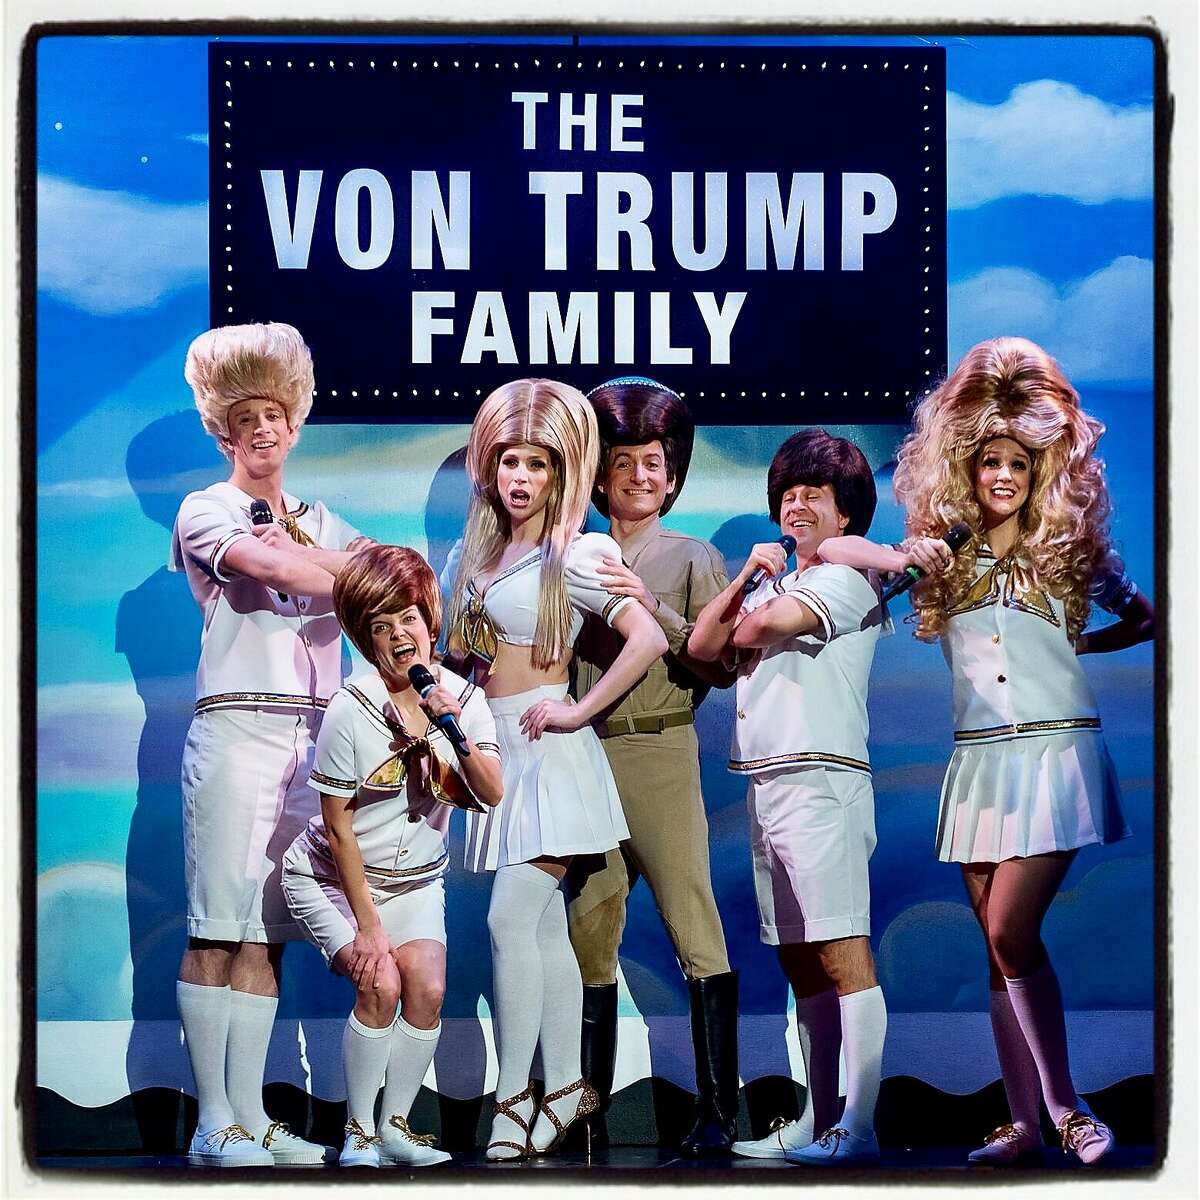 Beach Blanket Babylon cast members transformed into the Von Trump Family singers at the New Year's Eve show. Dec 2016.